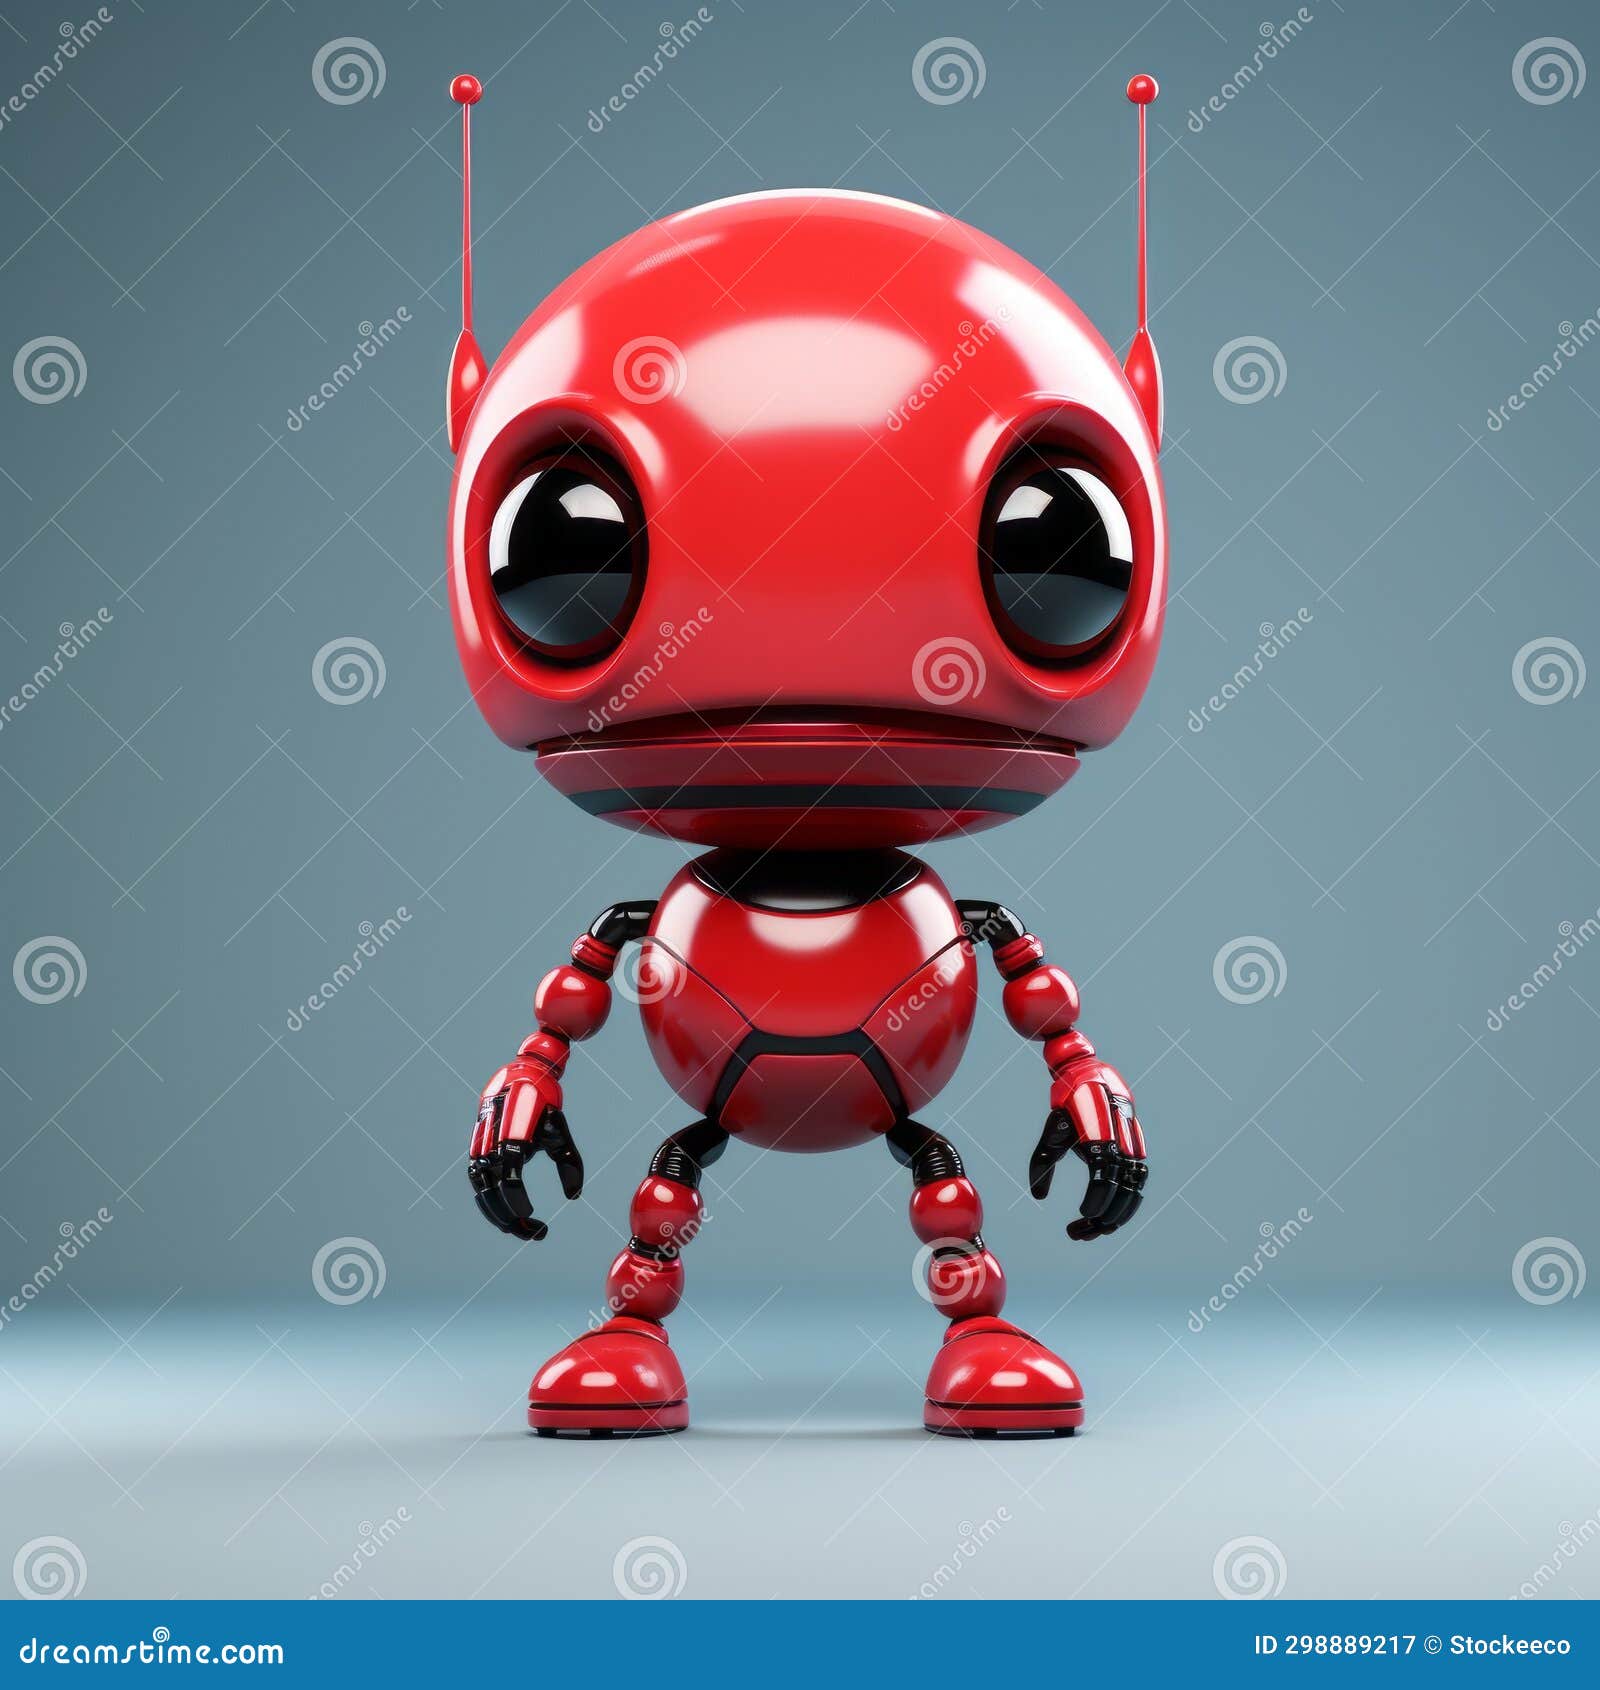 ironic red robot with shiny eyes: a unique blend of insects, flickr, and babycore